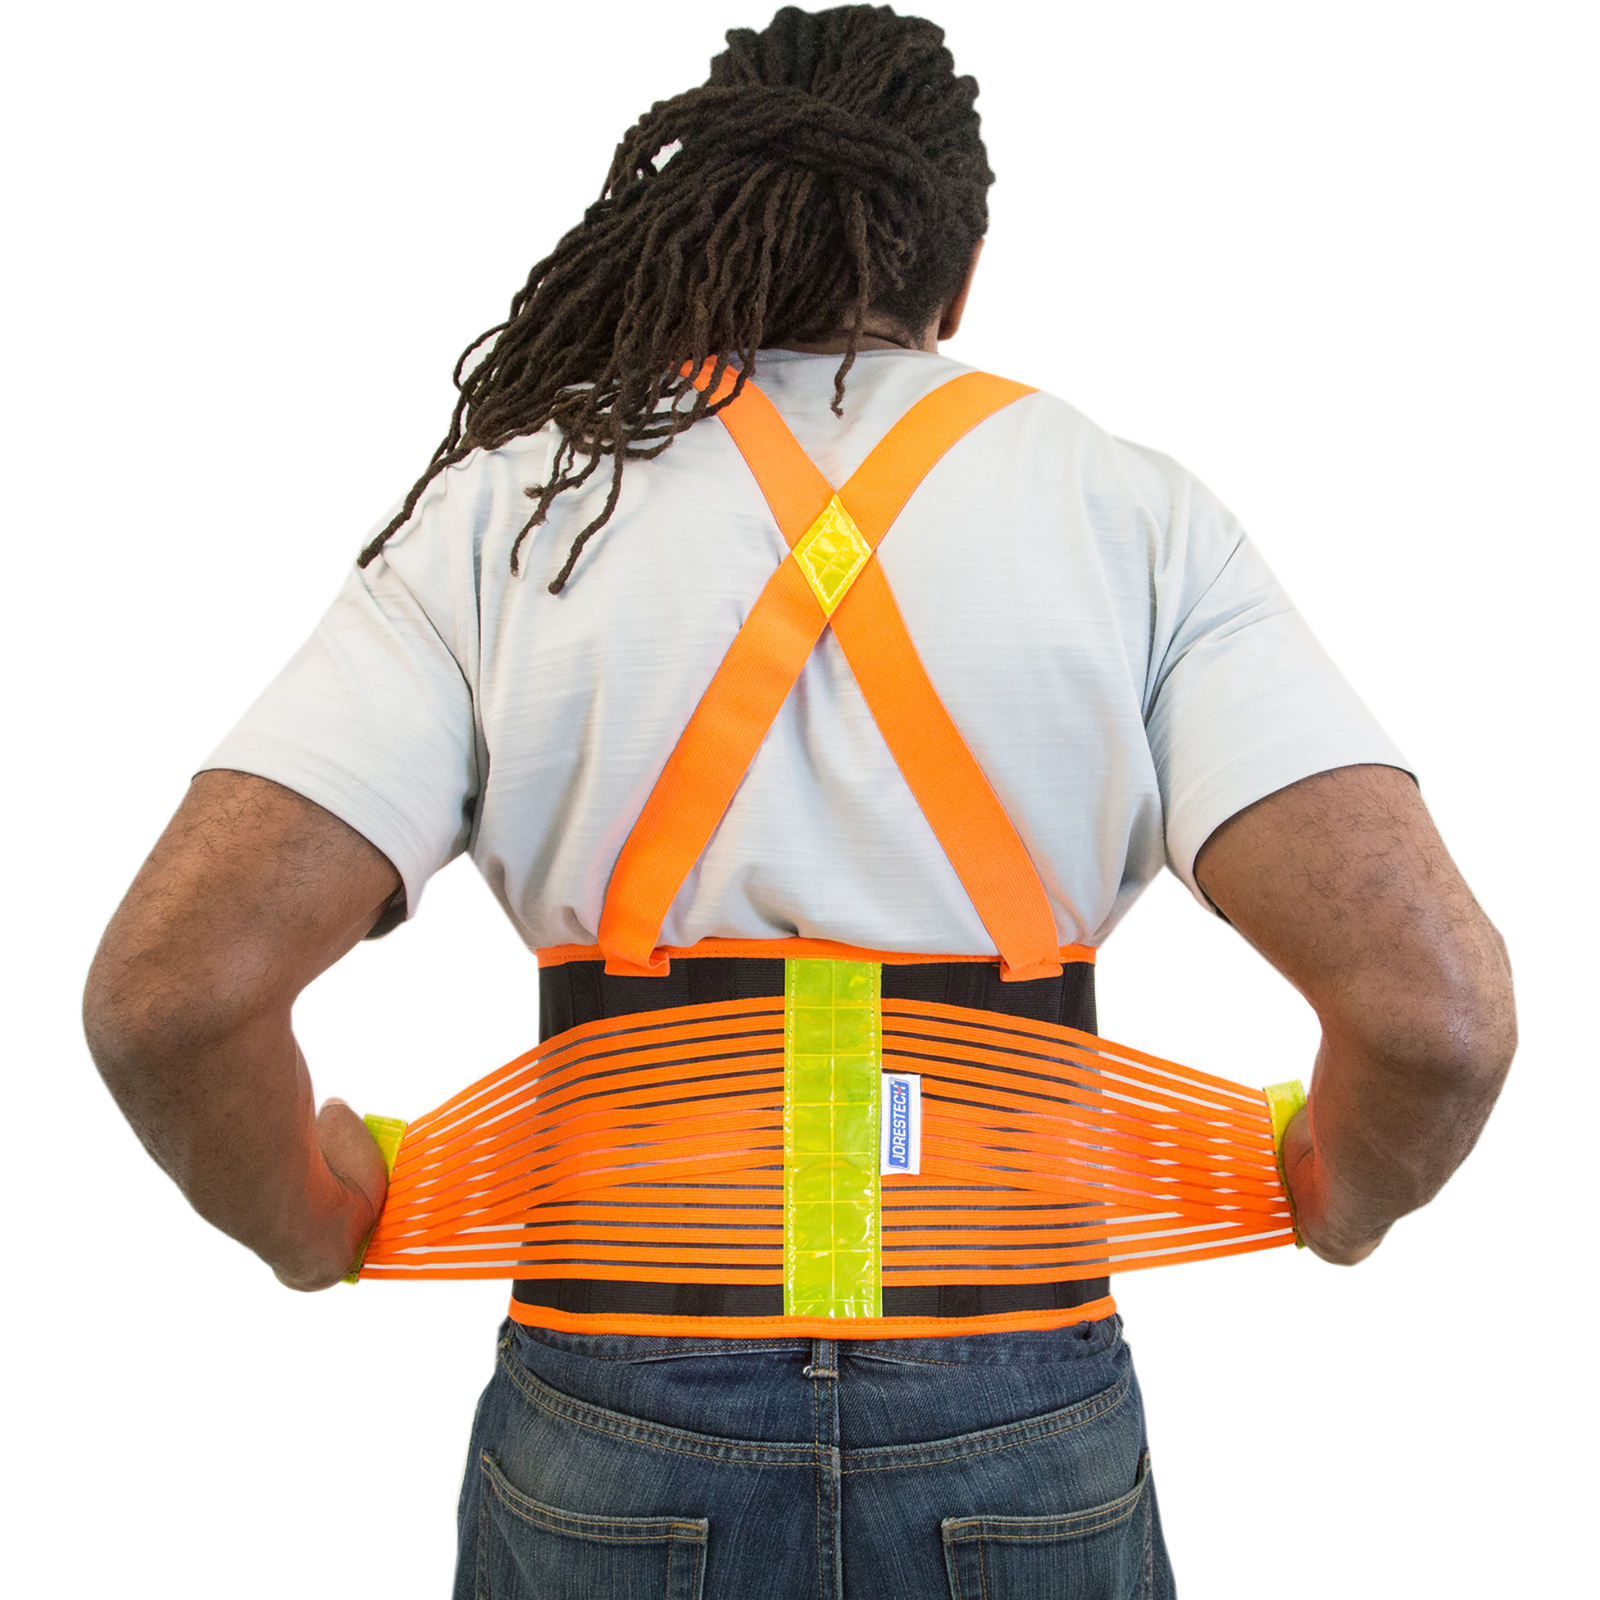 Back view of a fitted person wearing the JORESTECH Hi vis adjustable back support belt with suspenders and reflective stripes